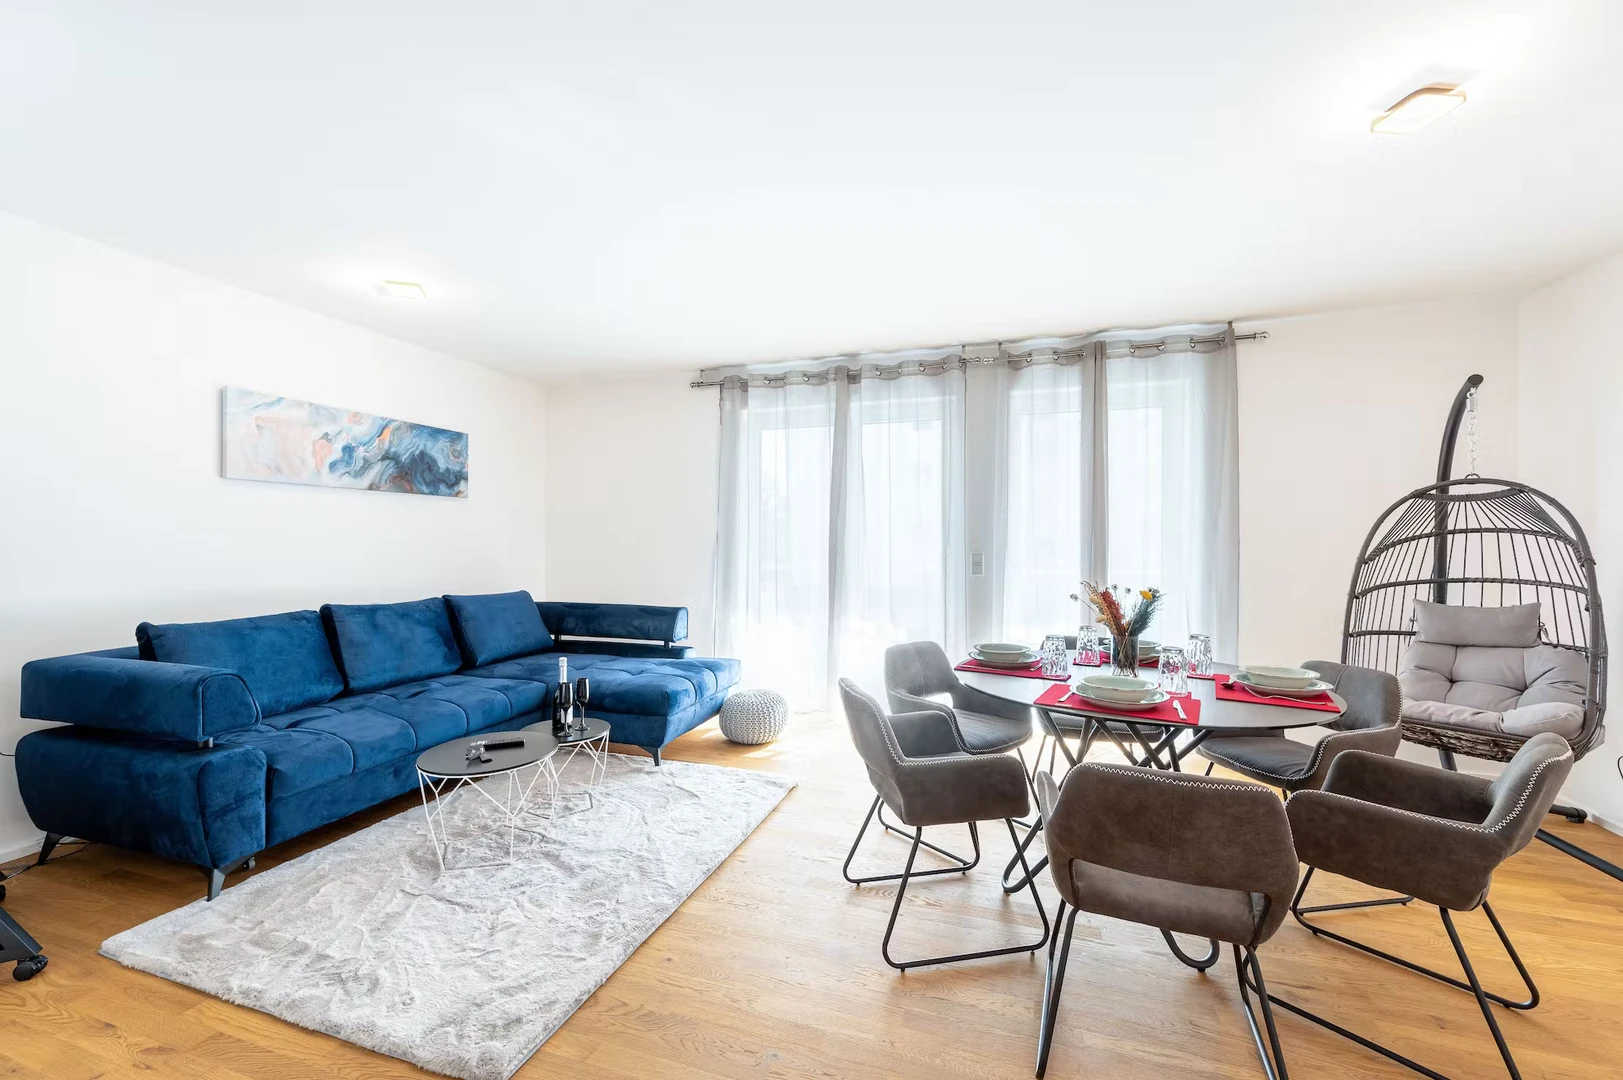 Accommodation in the centre of Ludwigshafen Am Rhein